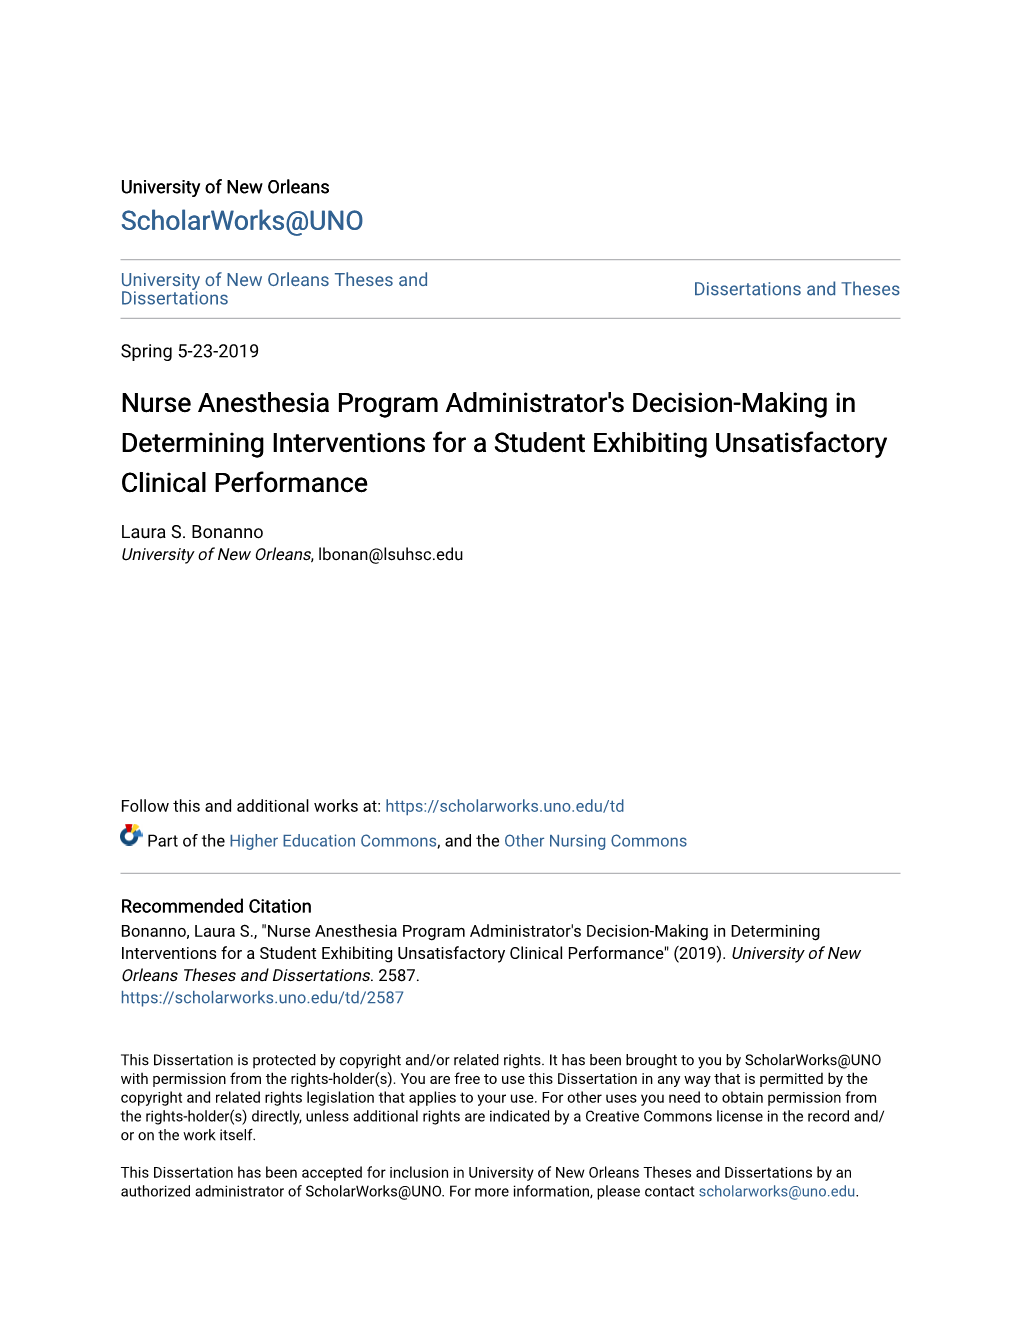 Nurse Anesthesia Program Administrator's Decision-Making in Determining Interventions for a Student Exhibiting Unsatisfactory Clinical Performance